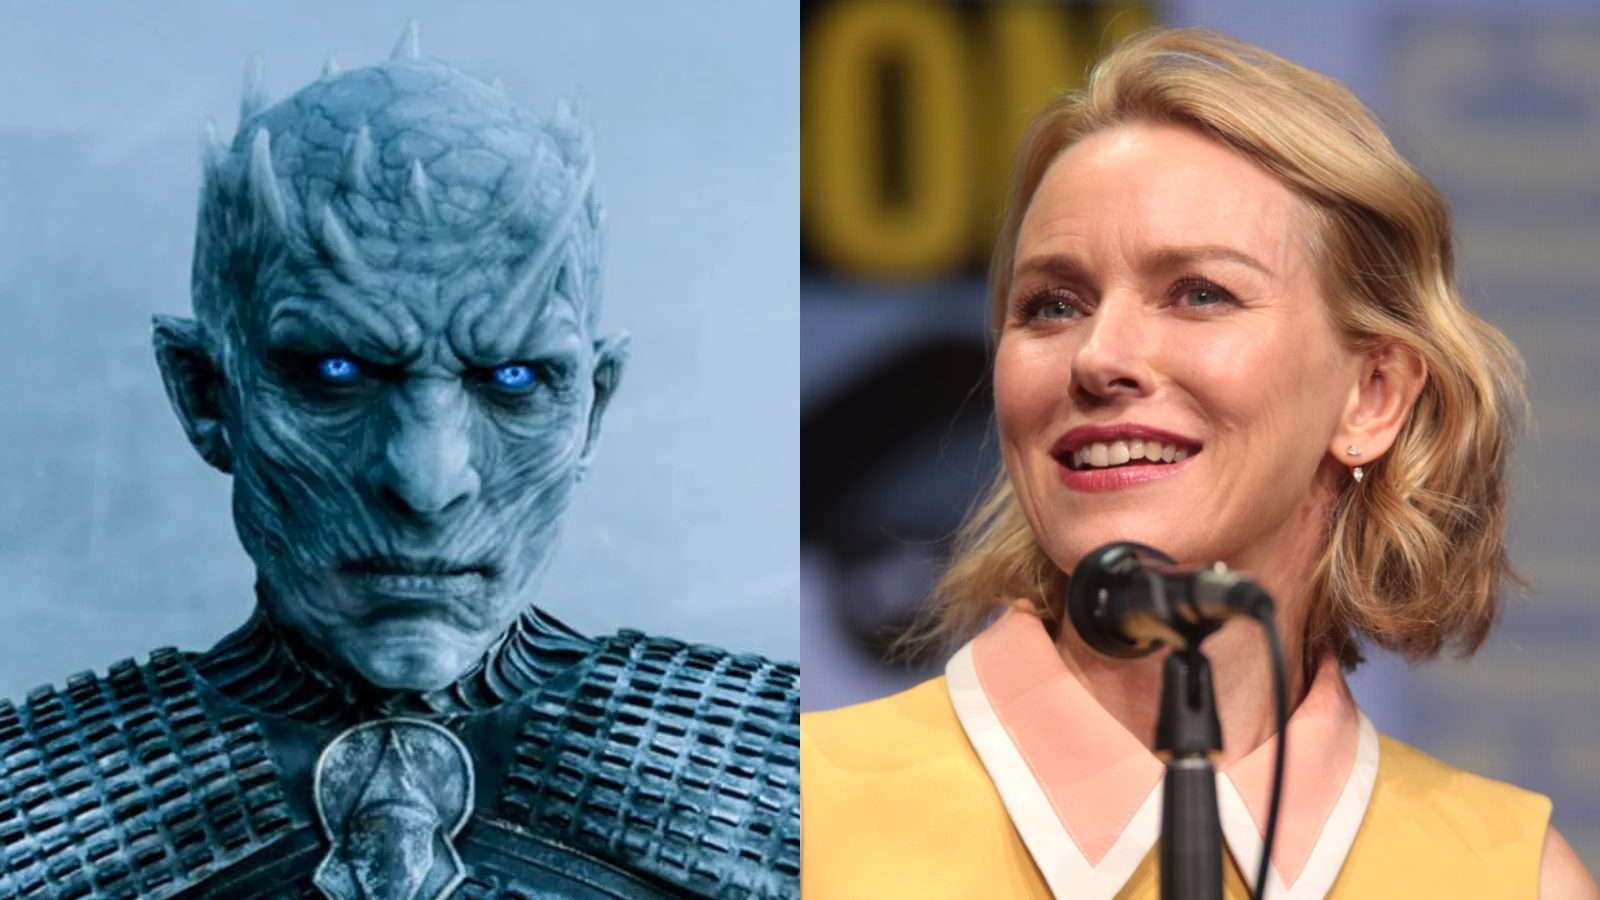 Night King leader of the White Walkers and actor Naomi Watts who was set to star in Bloodborn.